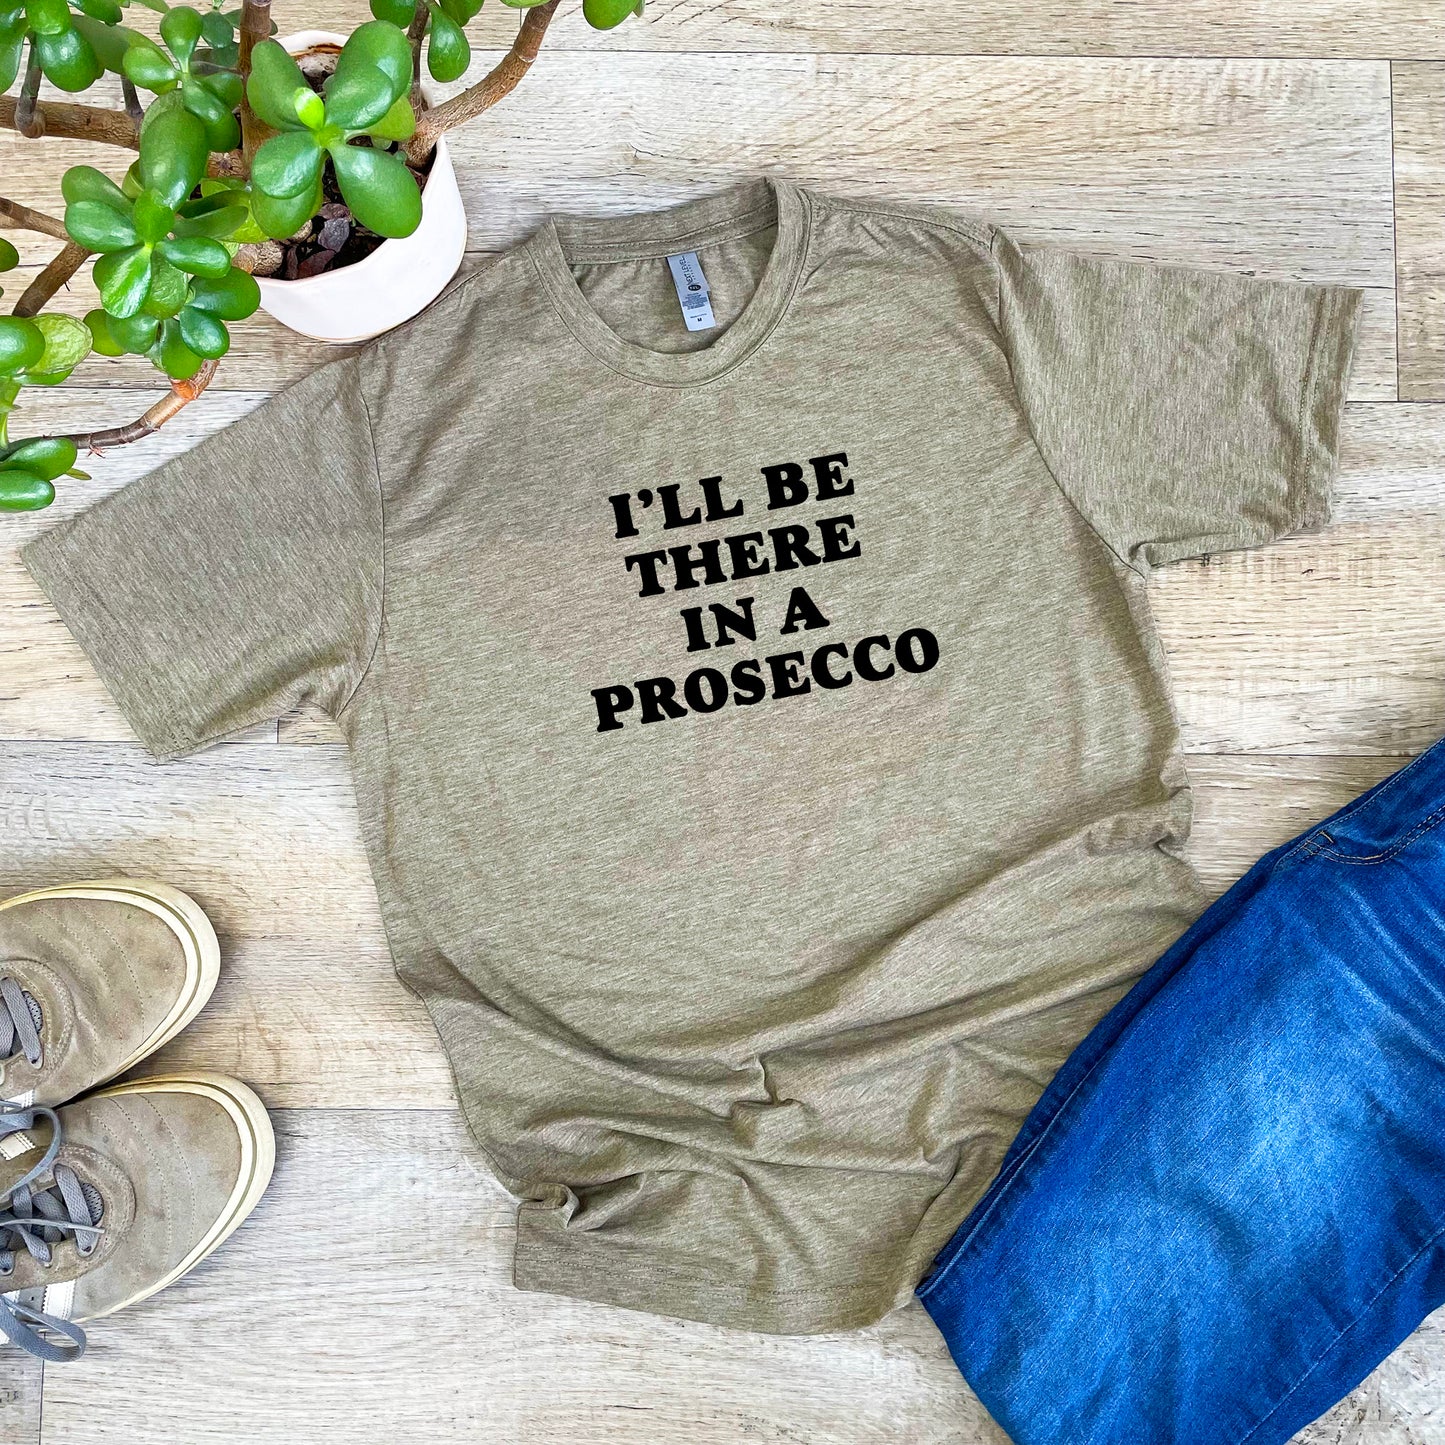 I'll Be There In a Prosecco - Bold Type - Men's / Unisex Tee - Stonewash Blue or Sage